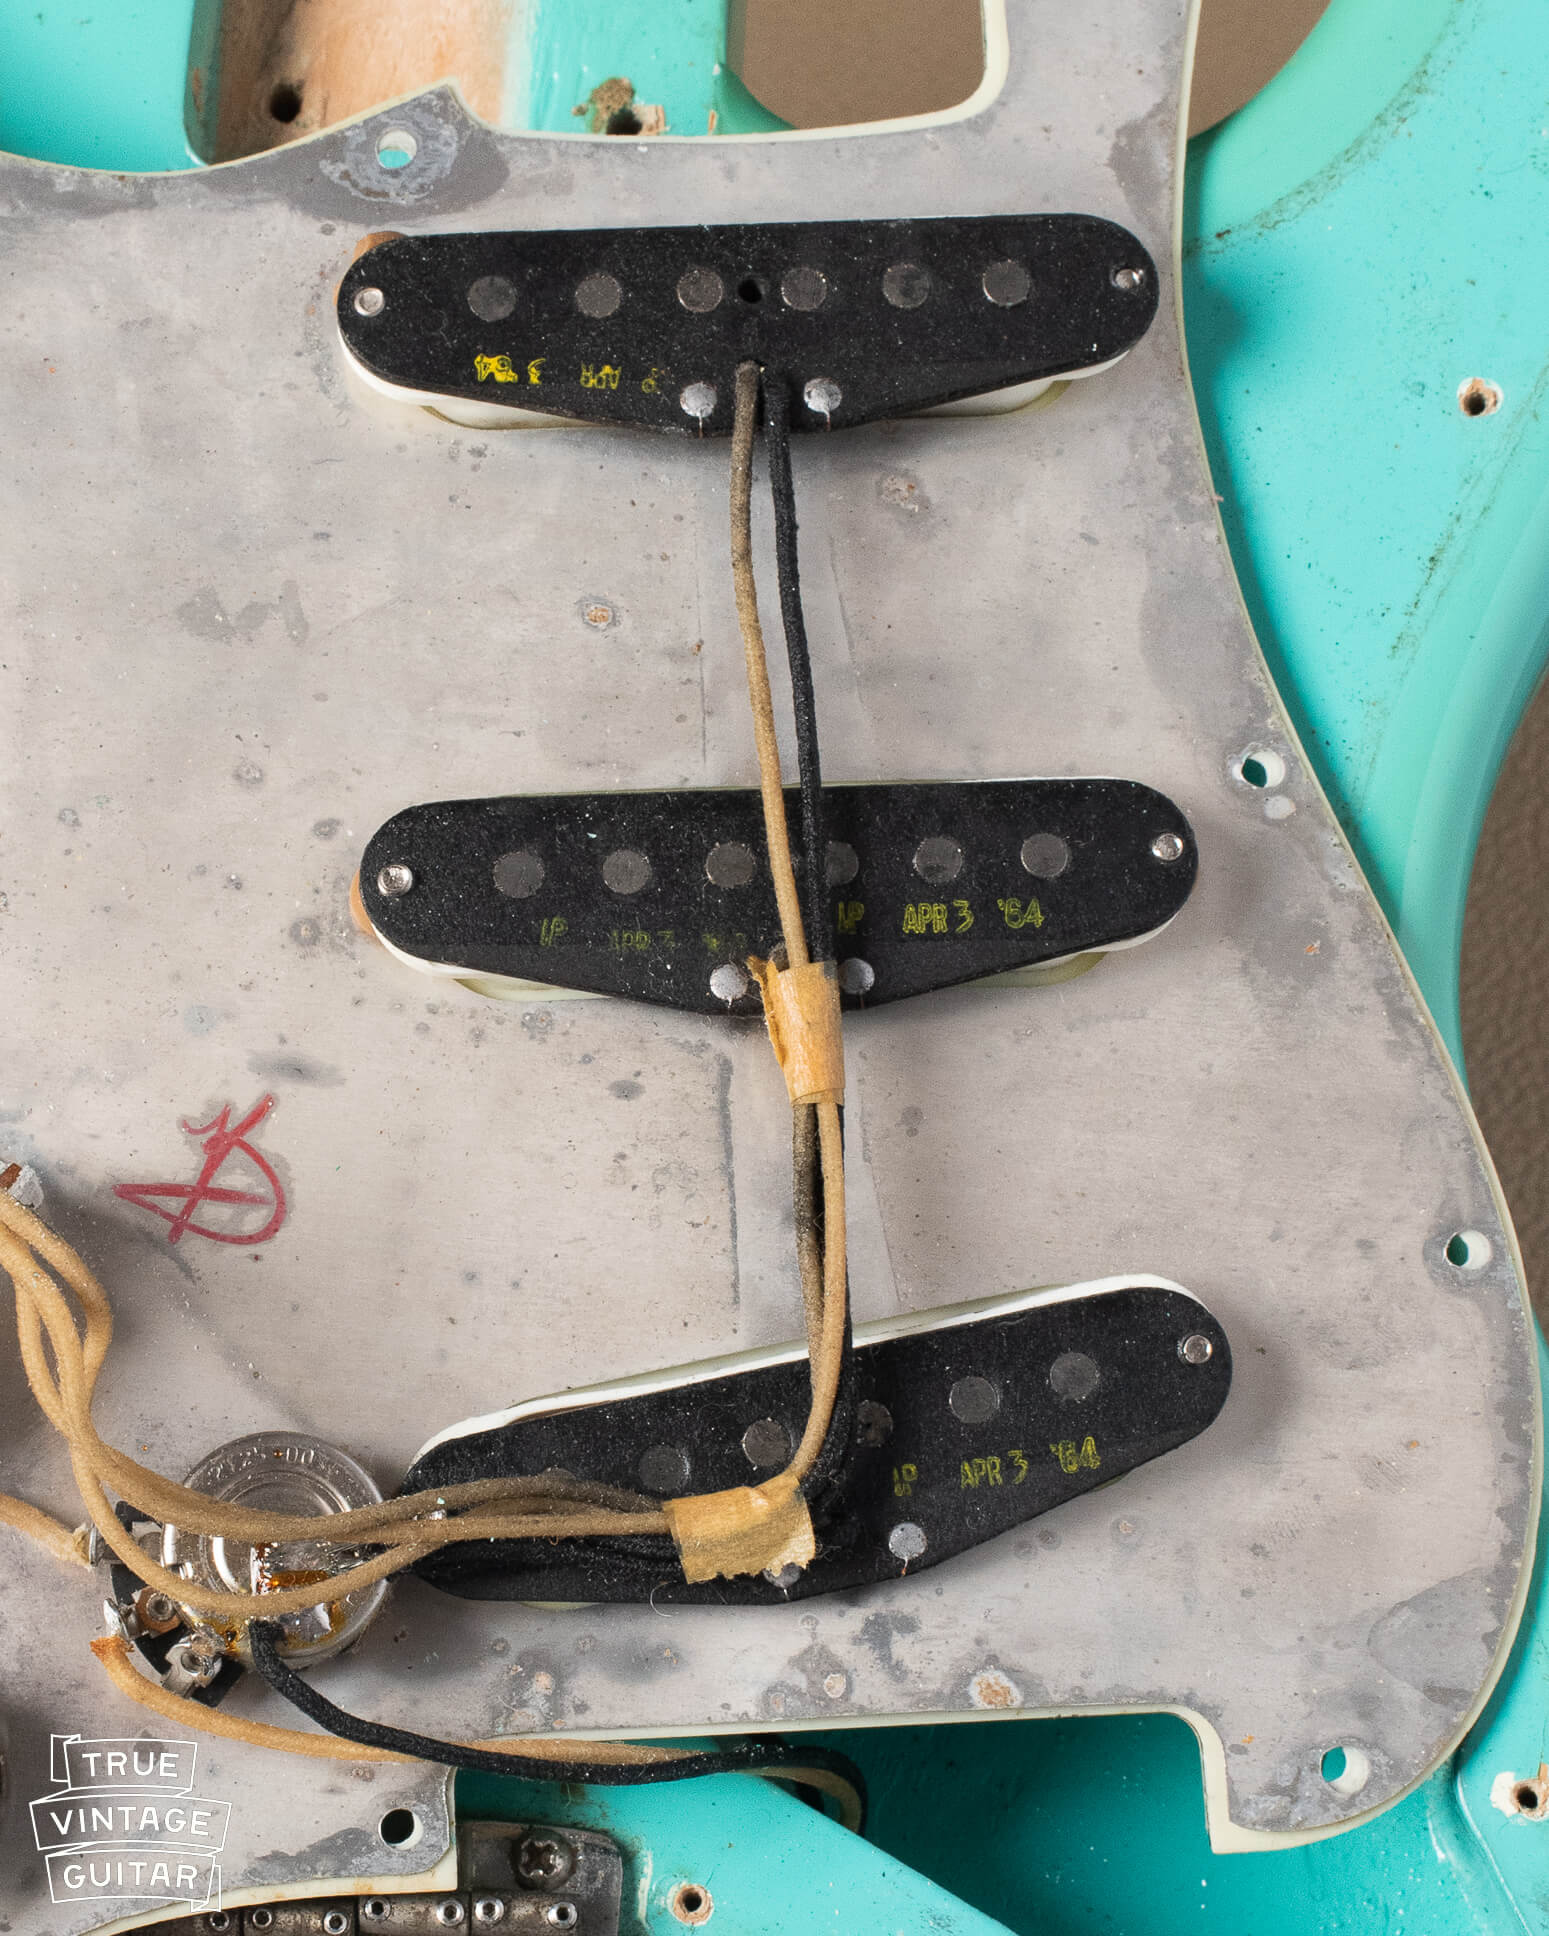 Black bobbin pickups with yellow ink stamp from 1964 Stratocaster